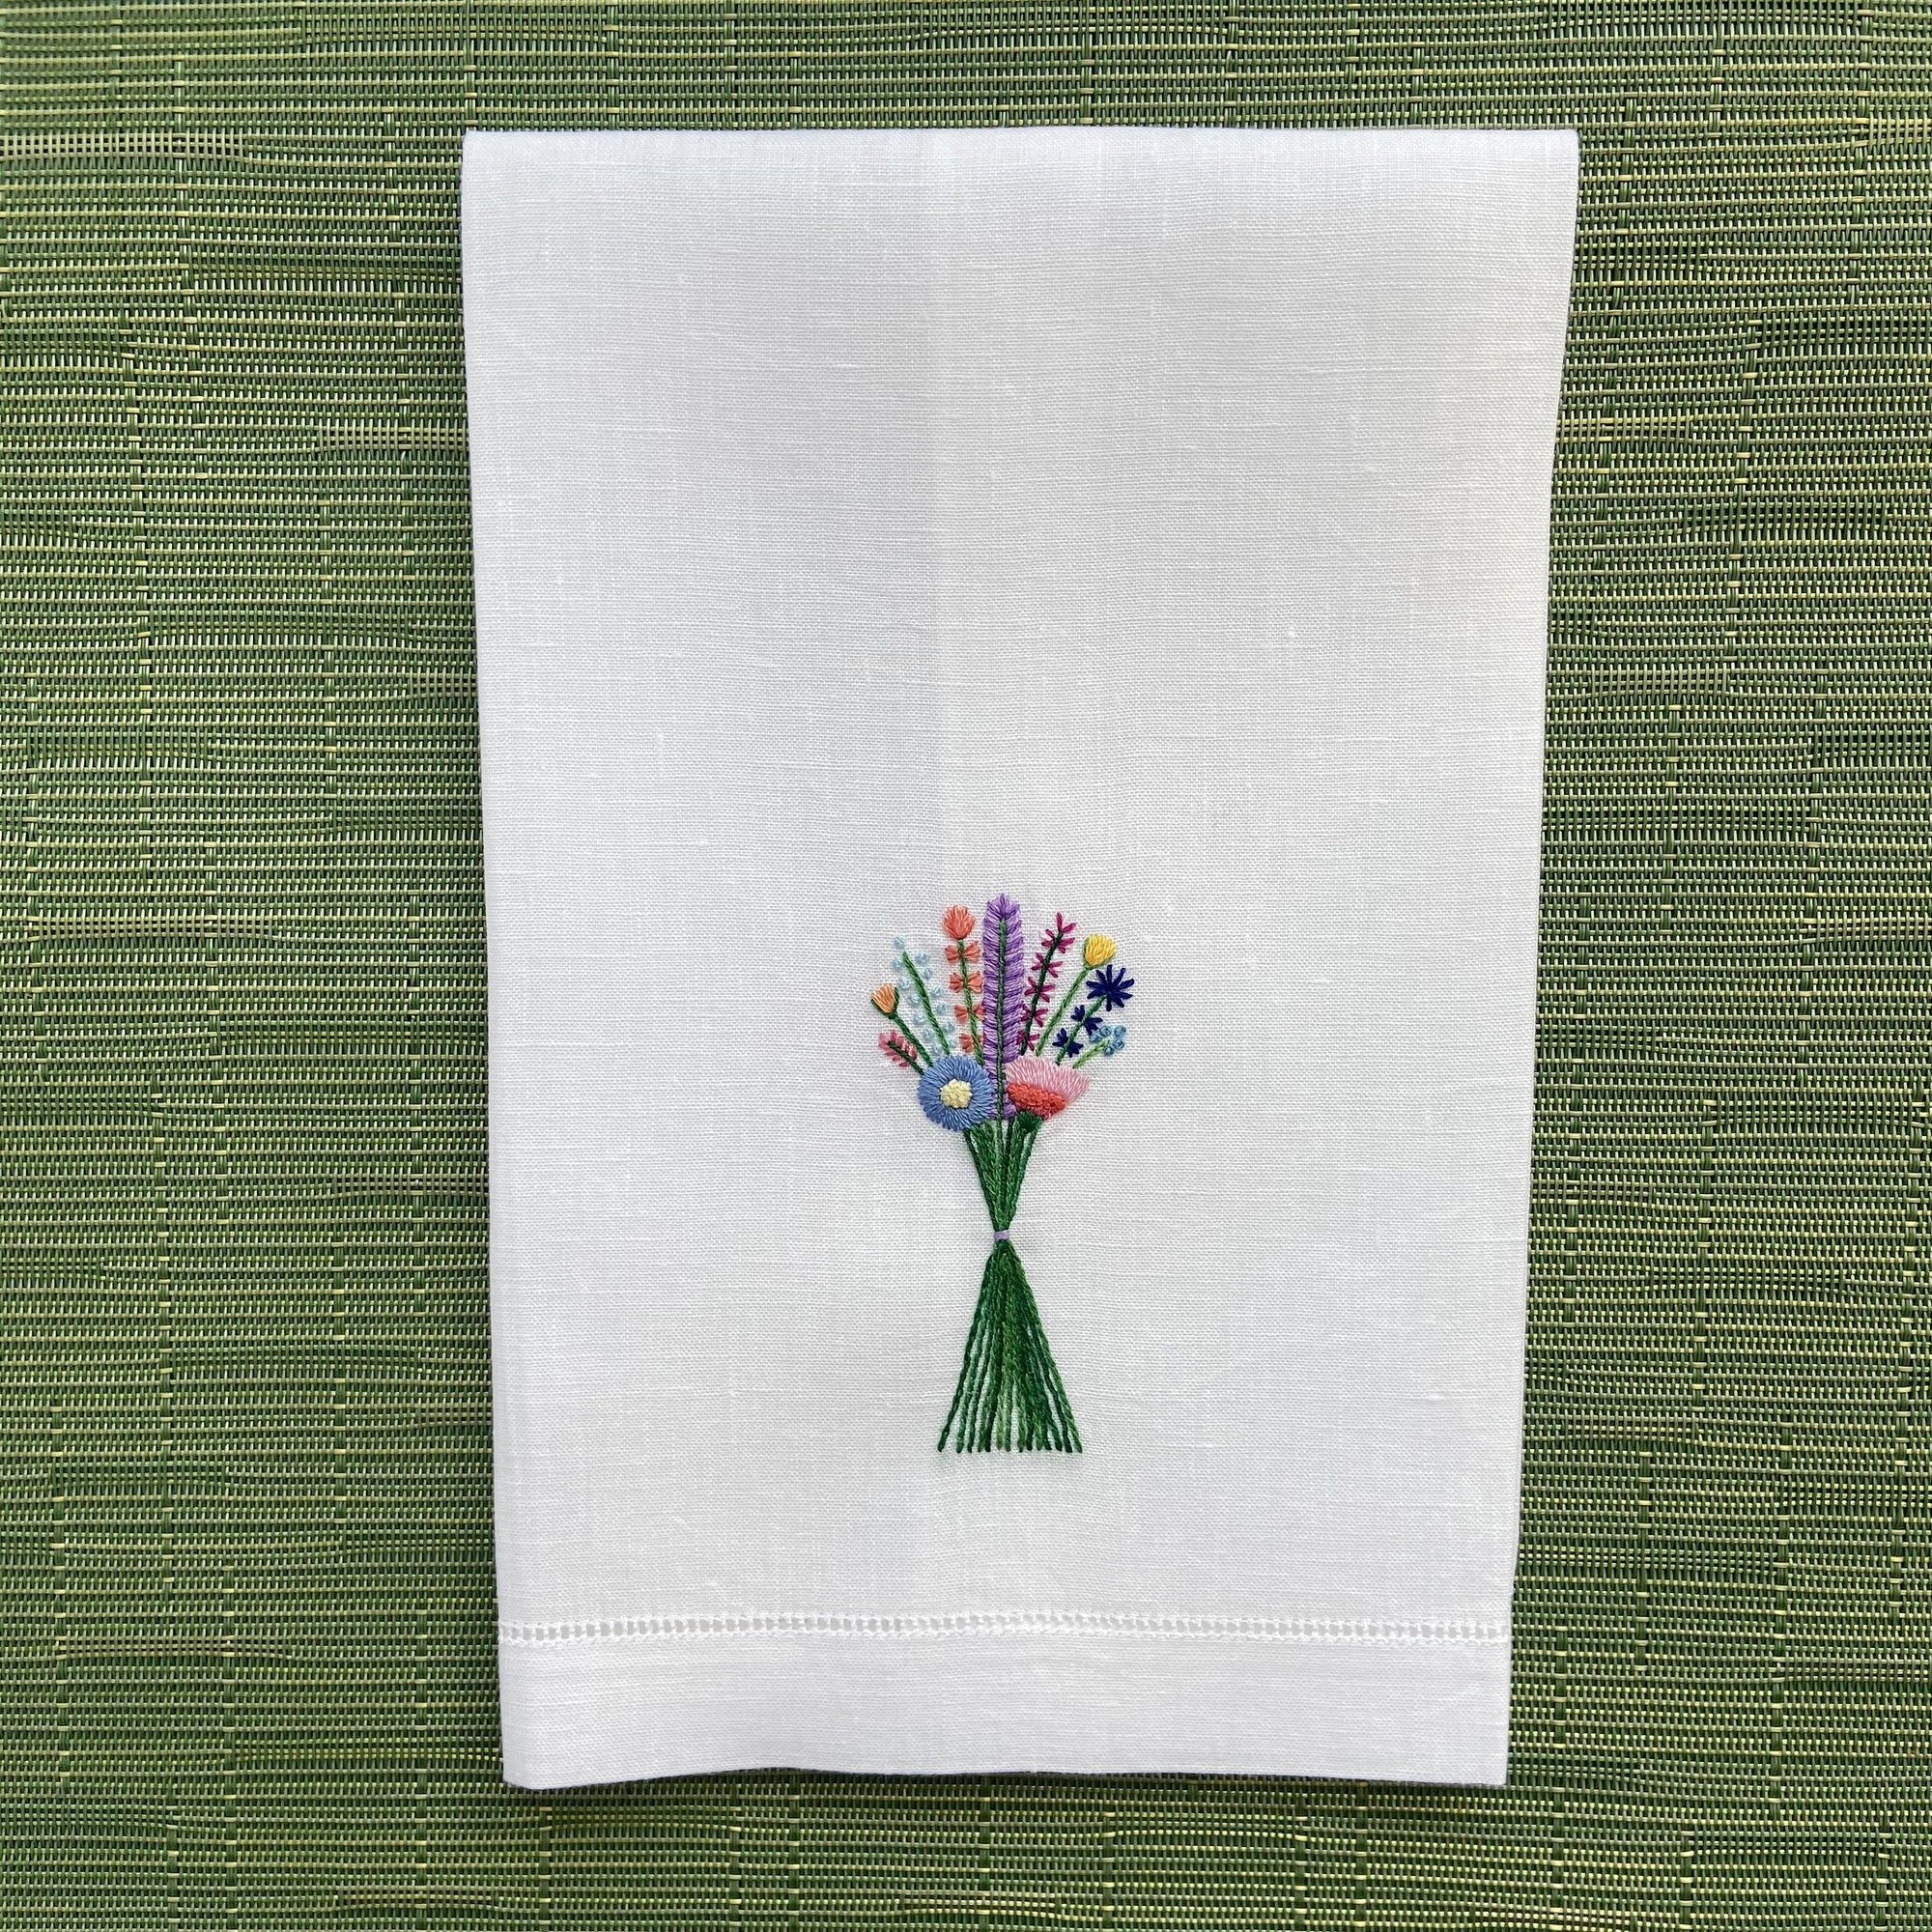 Happy Cactus Designs Hand Embroidered Guest Towel • Design and Image Copyright Happy Cactus Designs